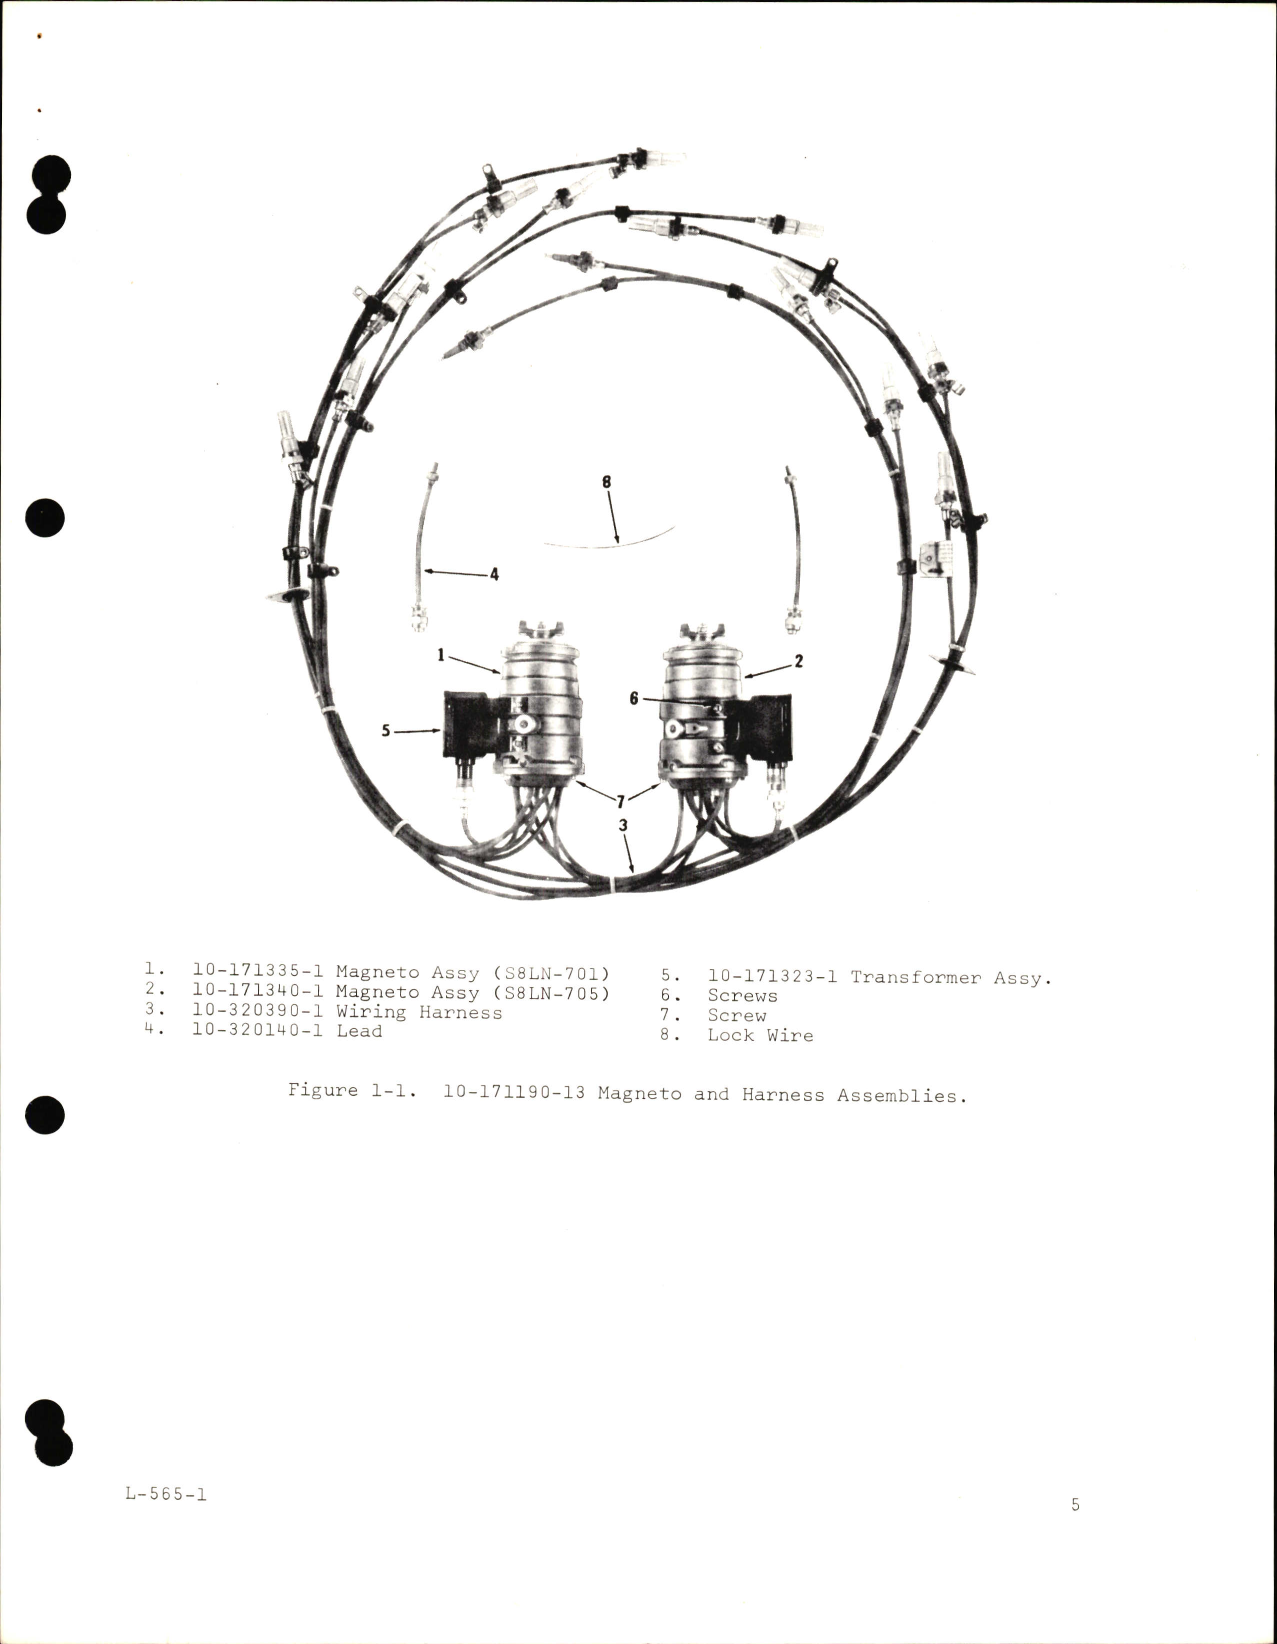 Sample page 5 from AirCorps Library document: Overhaul Instructions for S-700 Series Magneto and Harness Assemblies